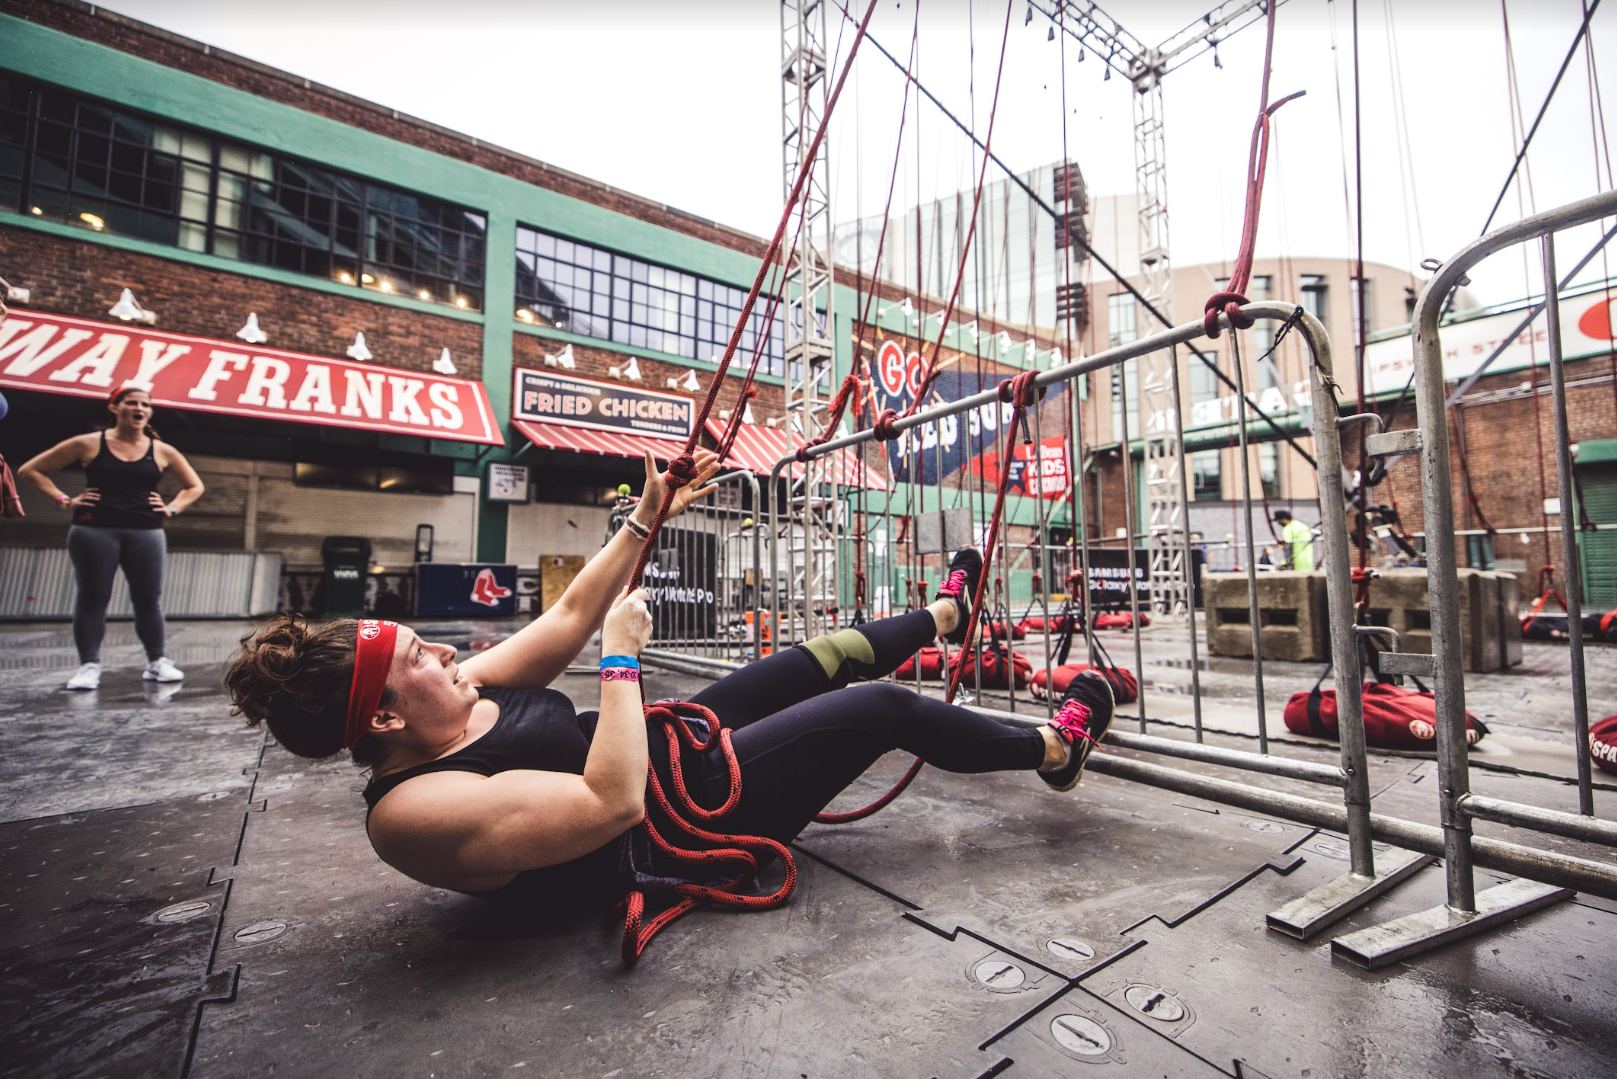 a spartan racer completing the hercules hoist obstacle at a stadion race